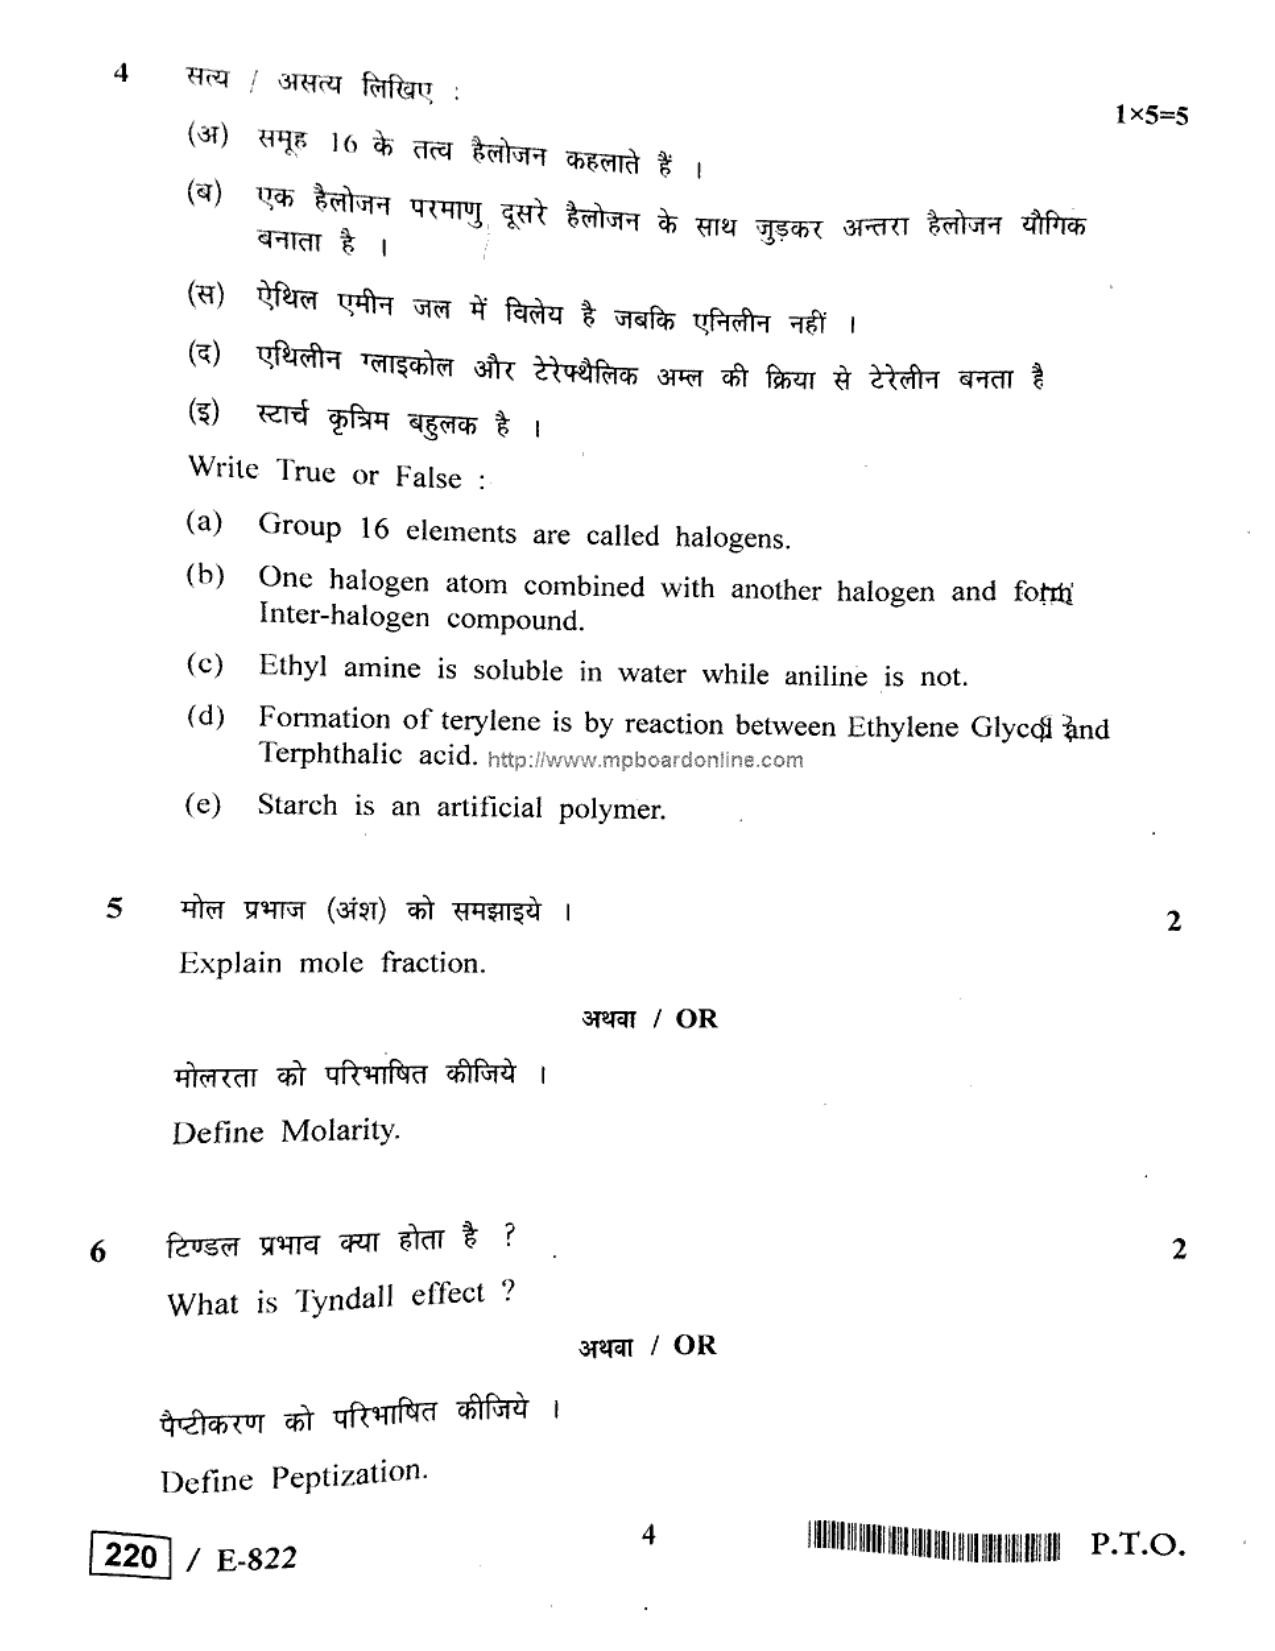 MP Board Class 12 Chemistry 2020 Question Paper - Page 4